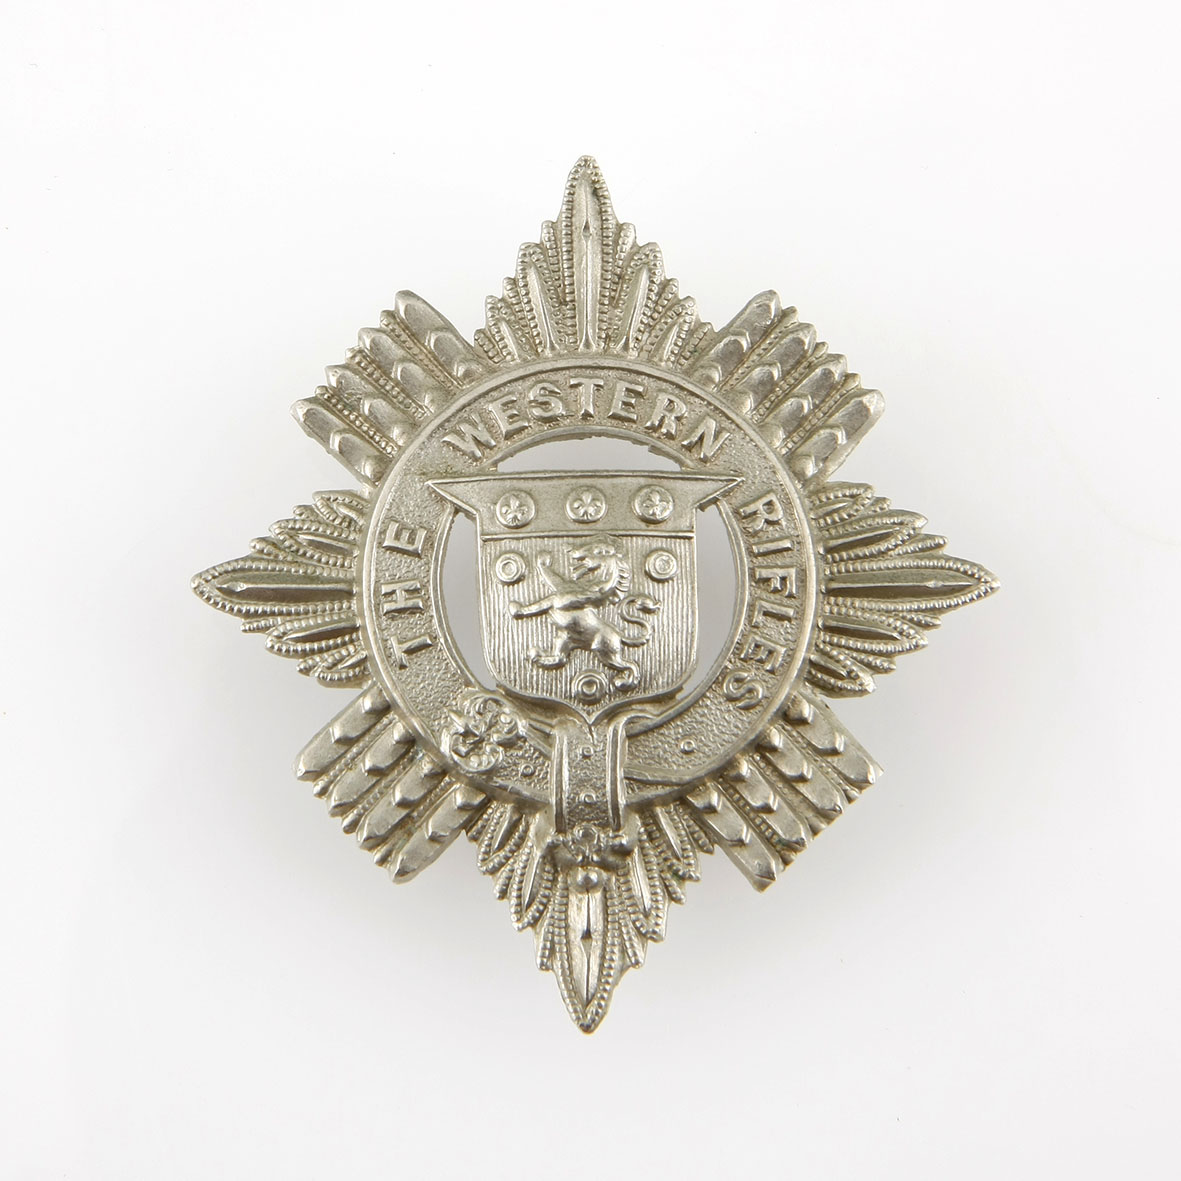 Anon WESTERN RIFLES WHITE METAL CAP BADGE WORN 1894-1897 ON SLOUCH HATS. (OWEN 254) Of great